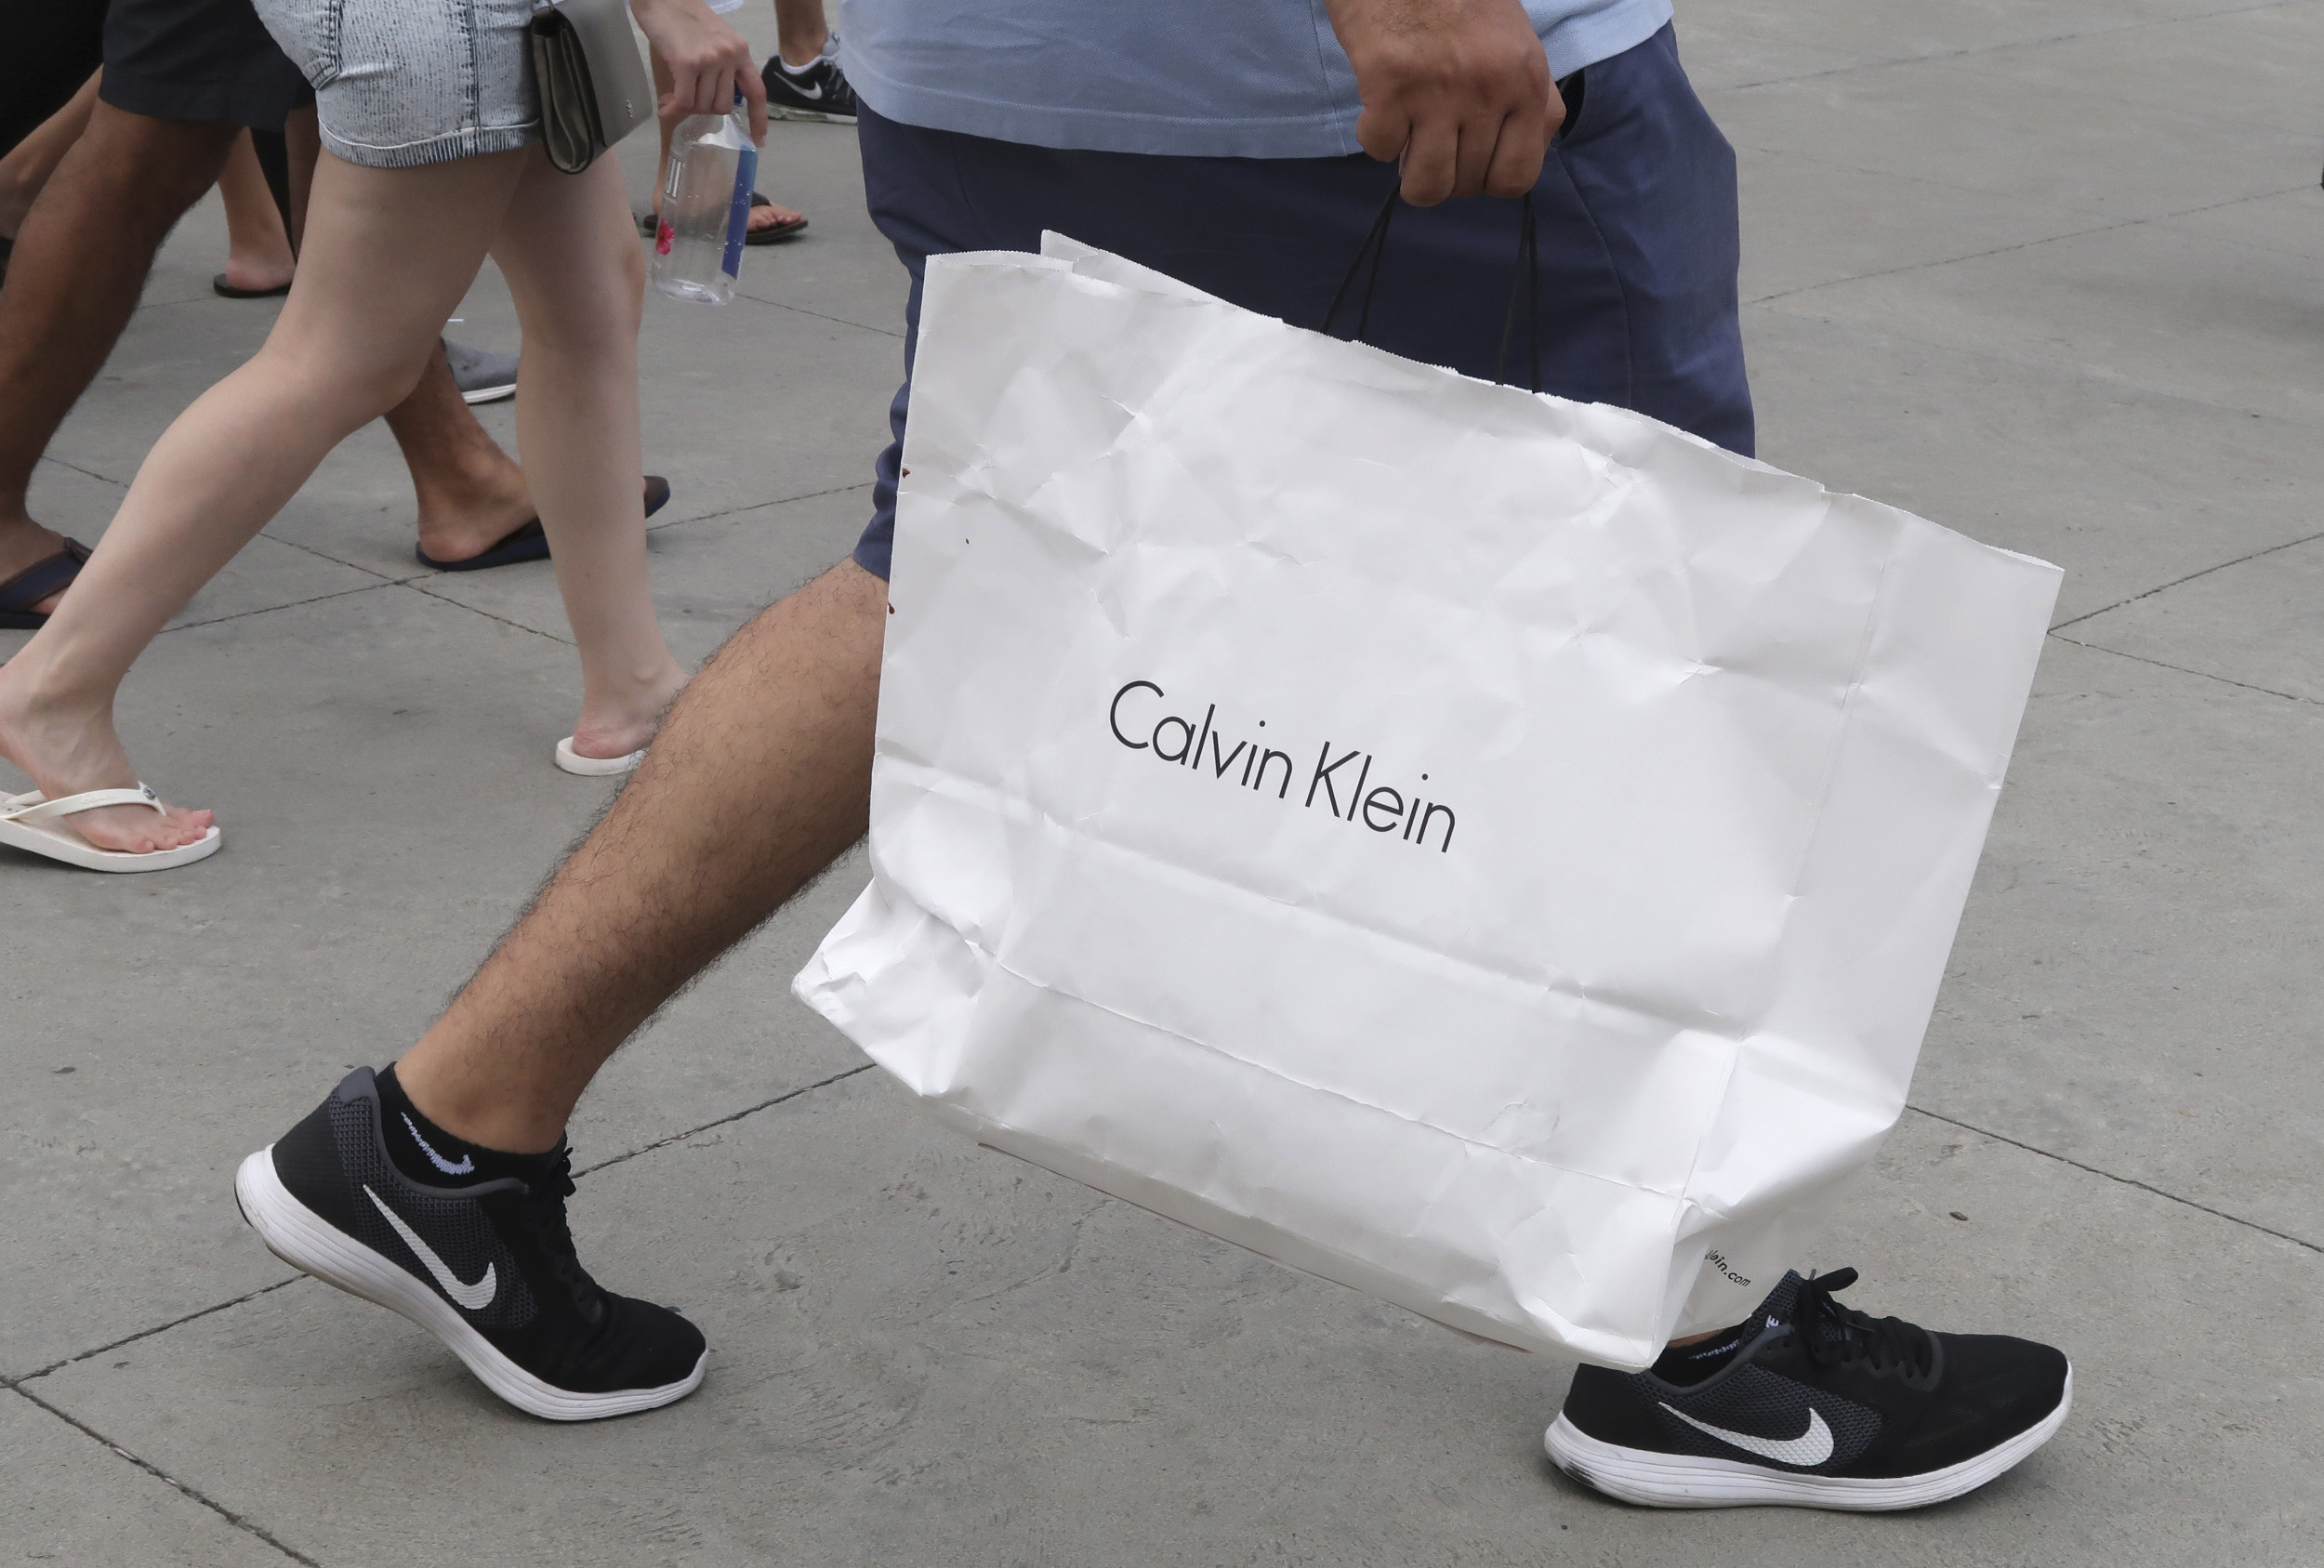 Calvin Klein featured a pregnant man in their new ad campaign for